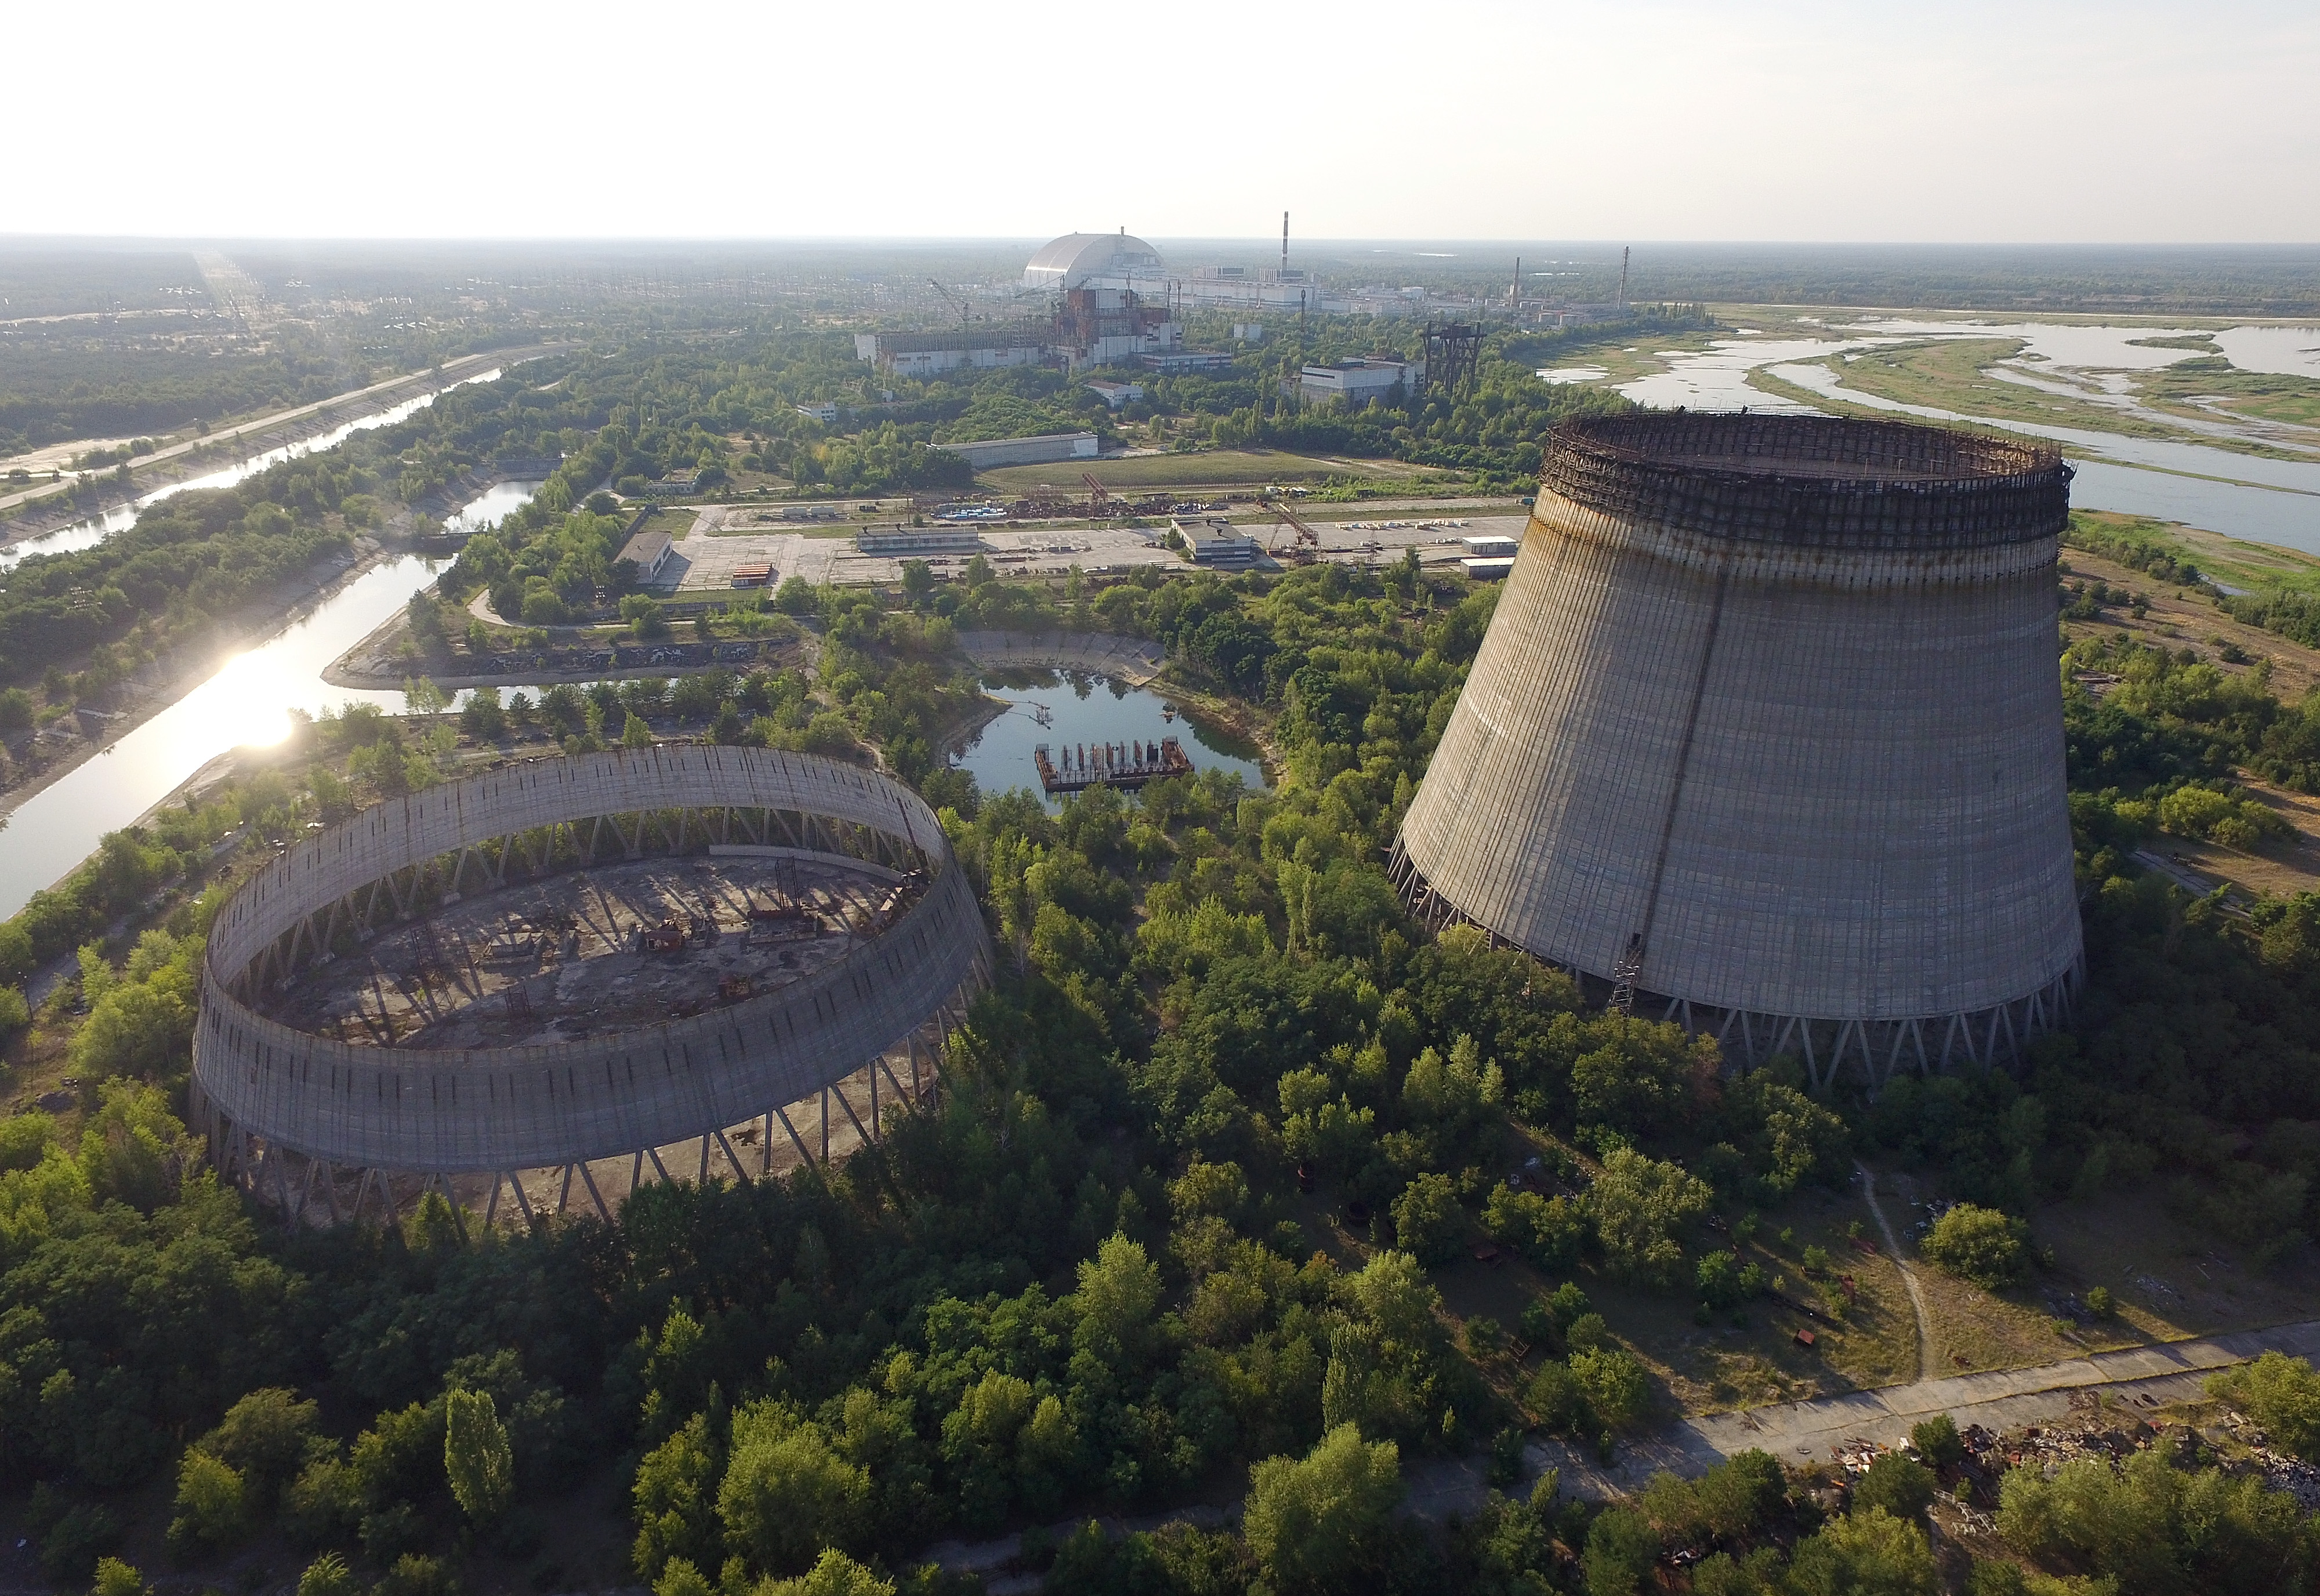 chernobyl aftermath images